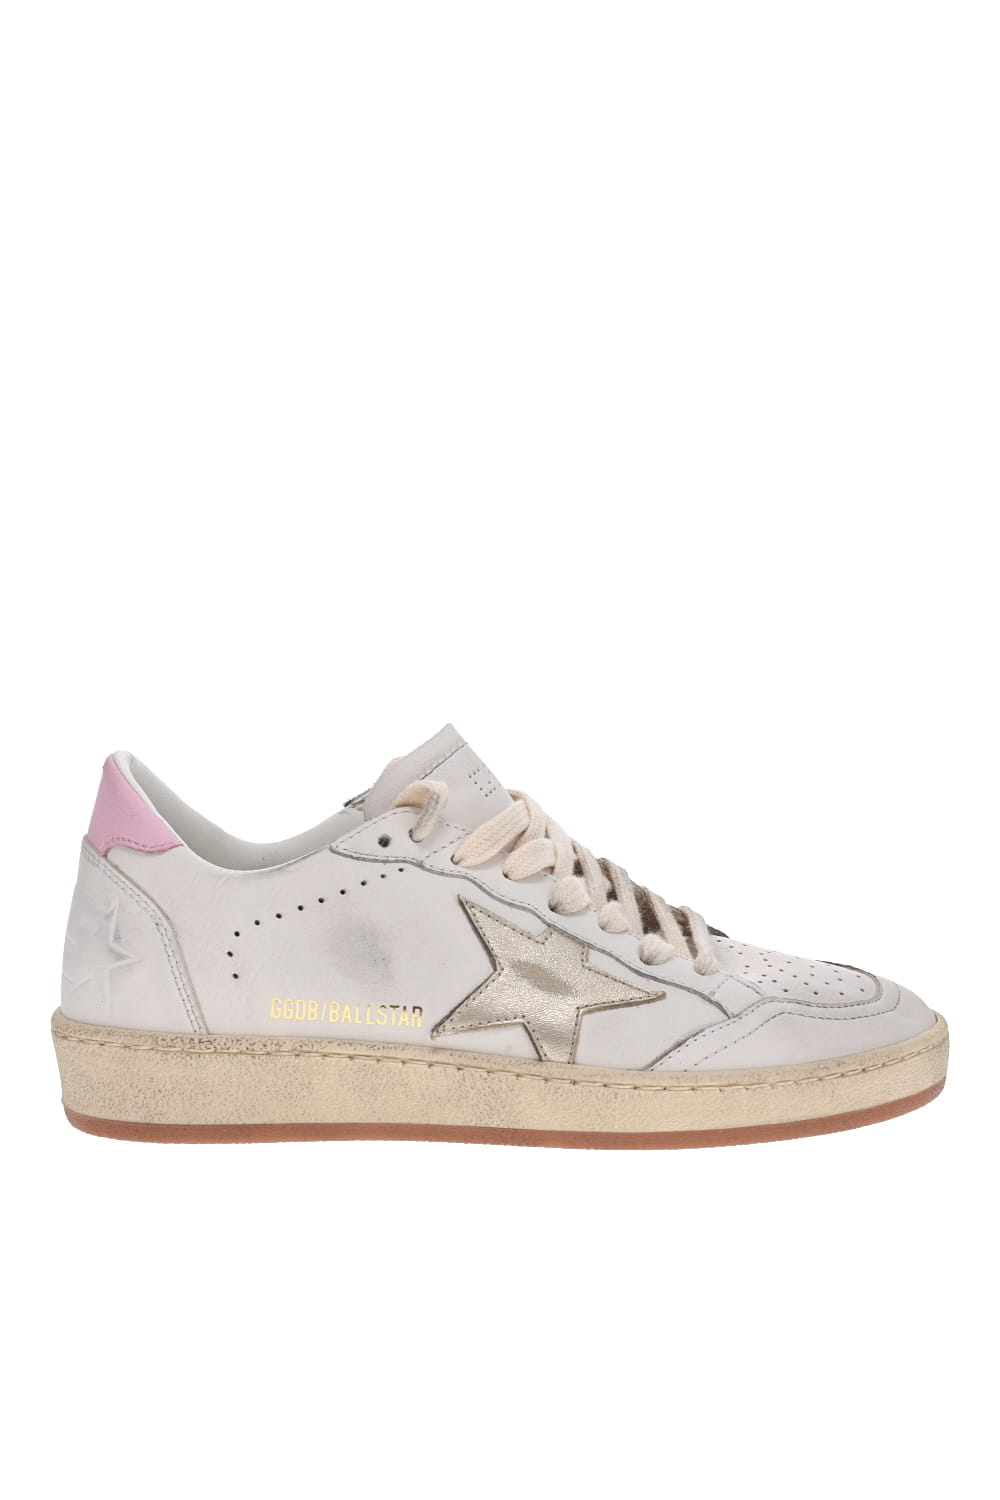 Golden Goose BALL STAR LEATHER UPPER LAMINATED STAR LEATHER HEEL AND SPUR GWF00117.F005409.11719 WHITE/PLATINUM/ORCHID PINK